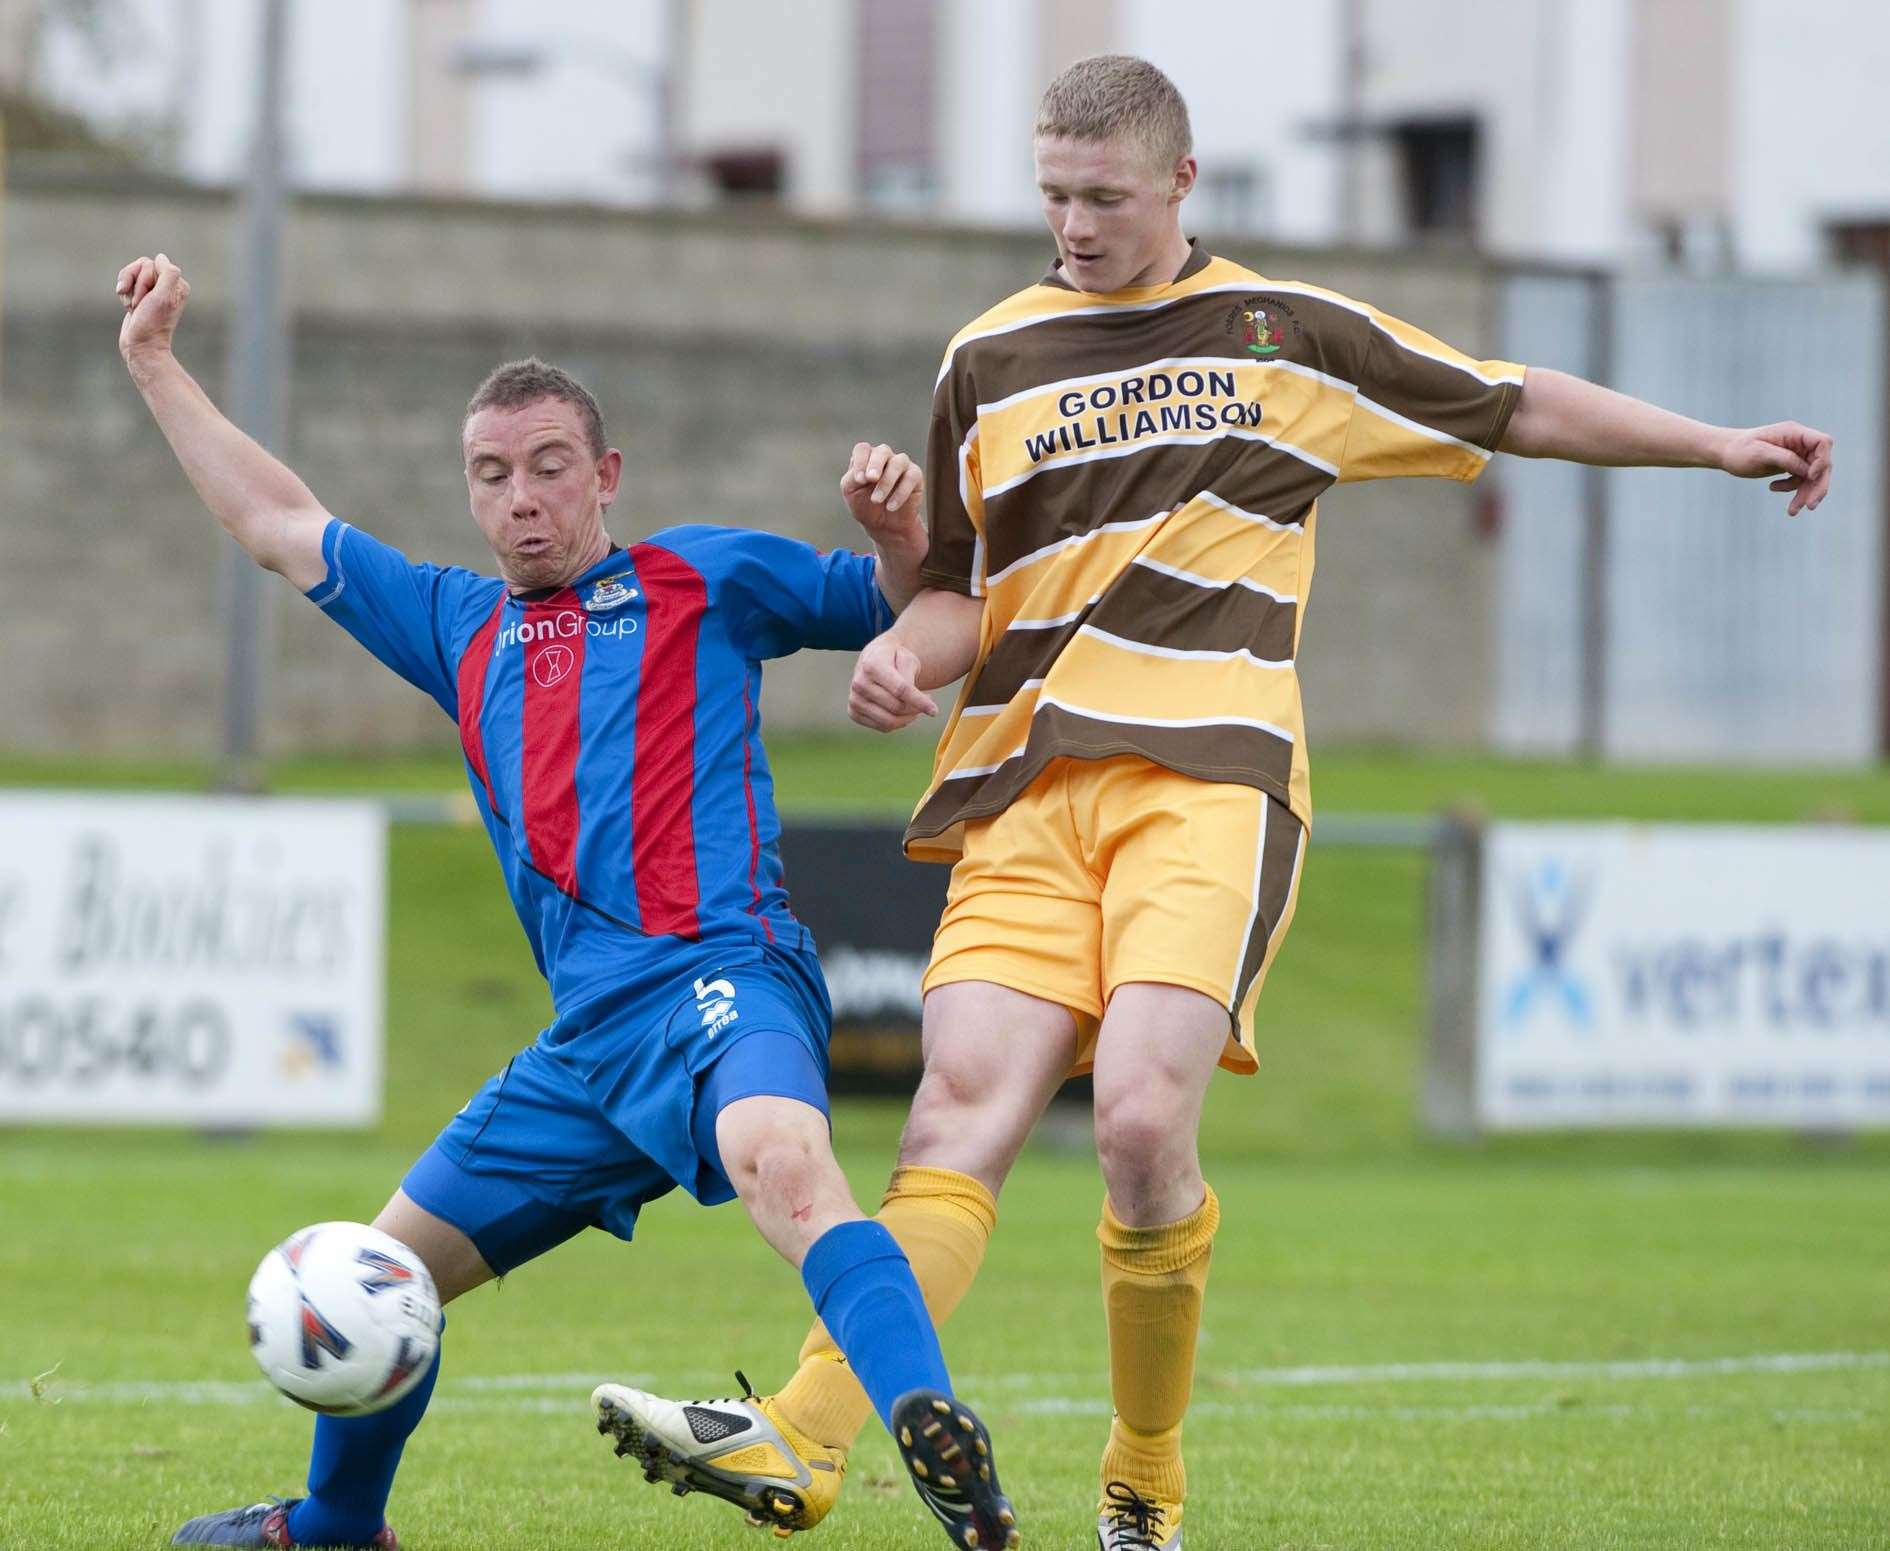 Lee Fraser scored in a 4-3 defeat against Caley Thistle in the North Cup final in 2011. Pic - Phil Downie.